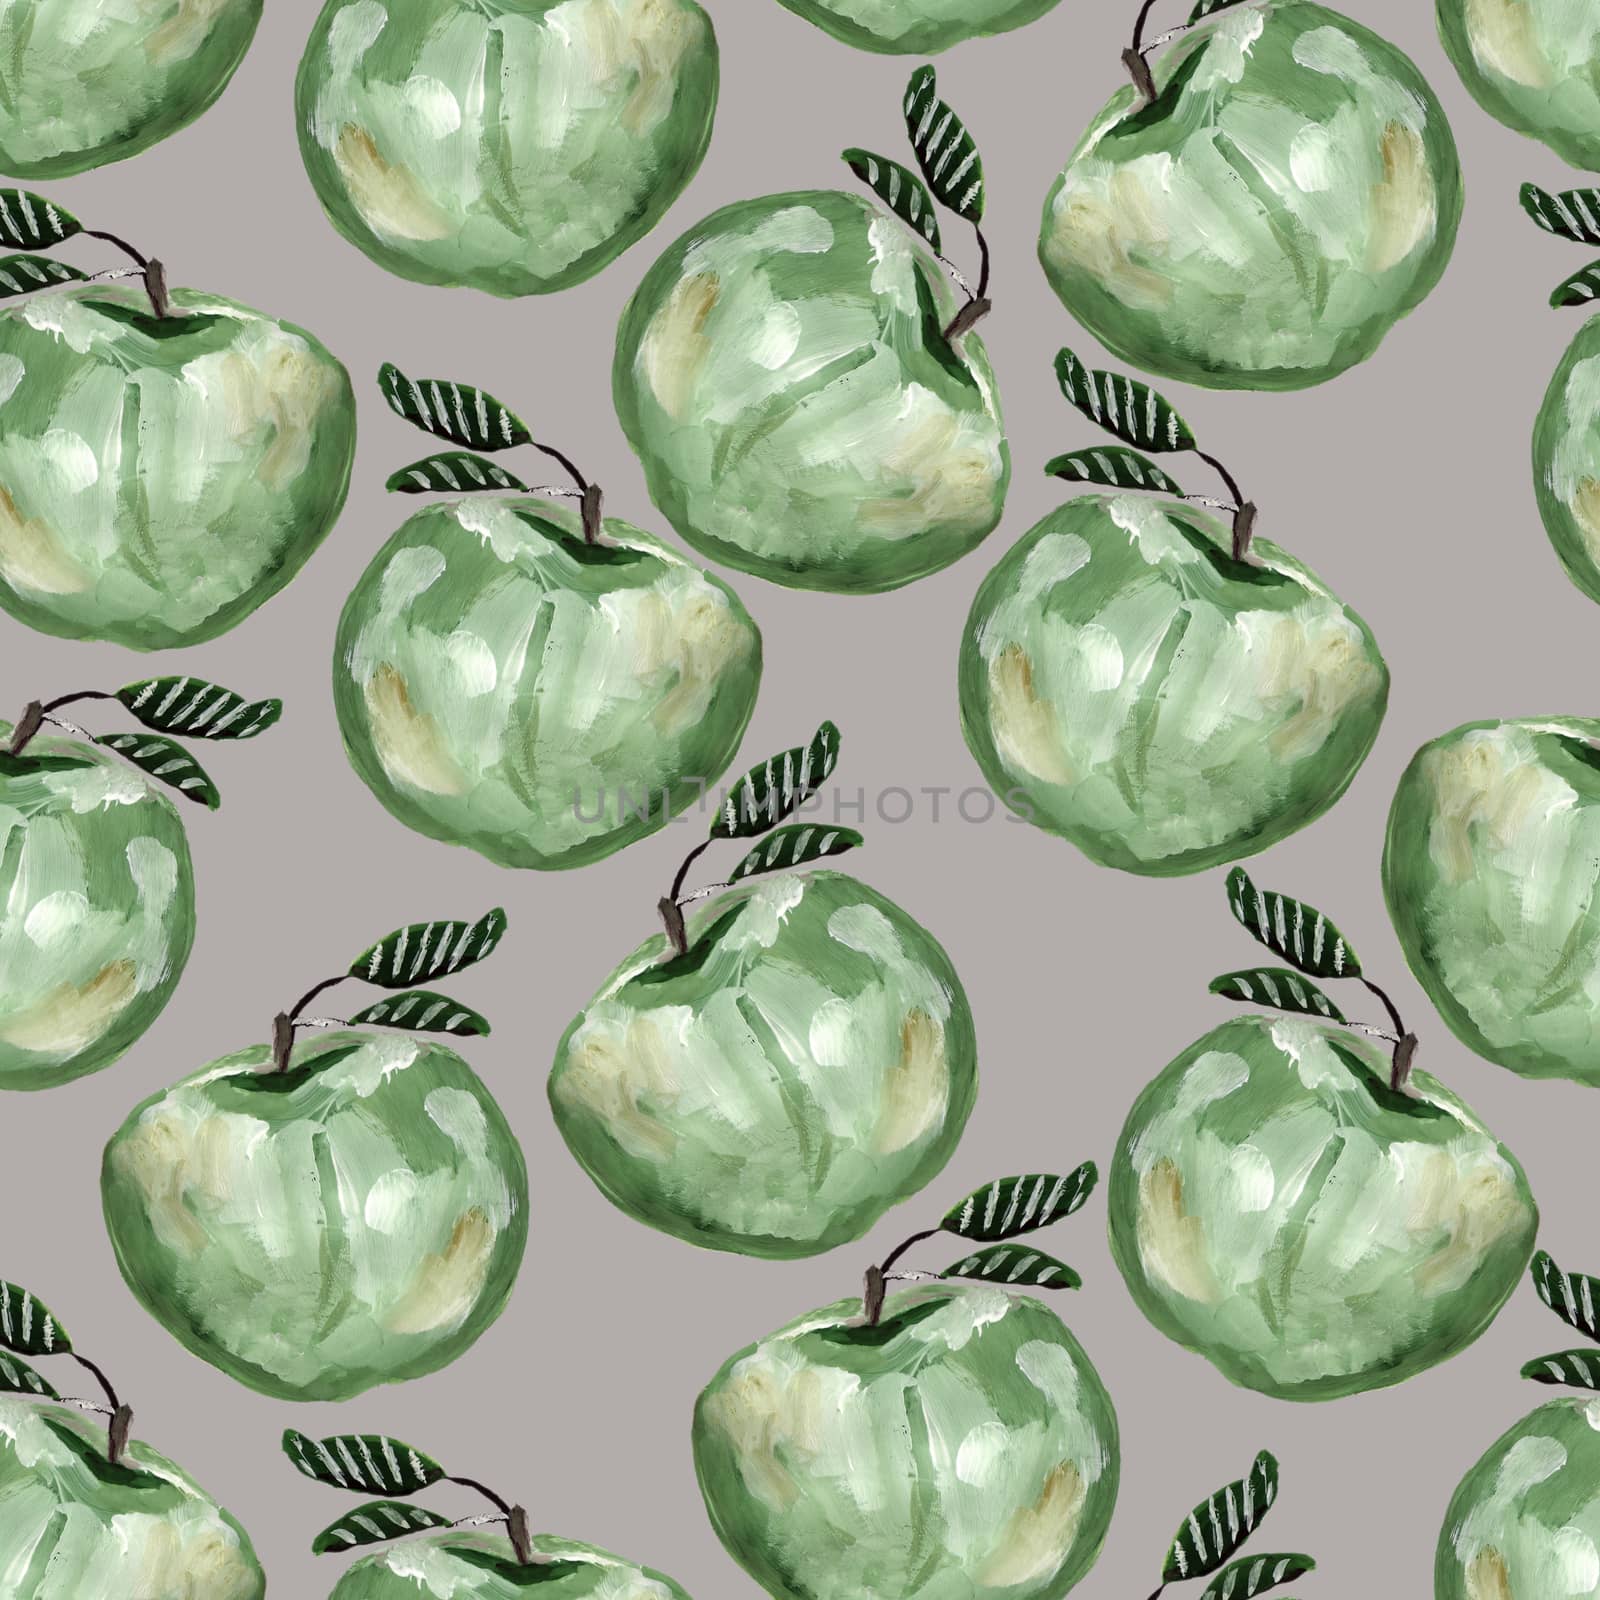 Hand drawn seamless pattern with green apples. by Nata_Prando